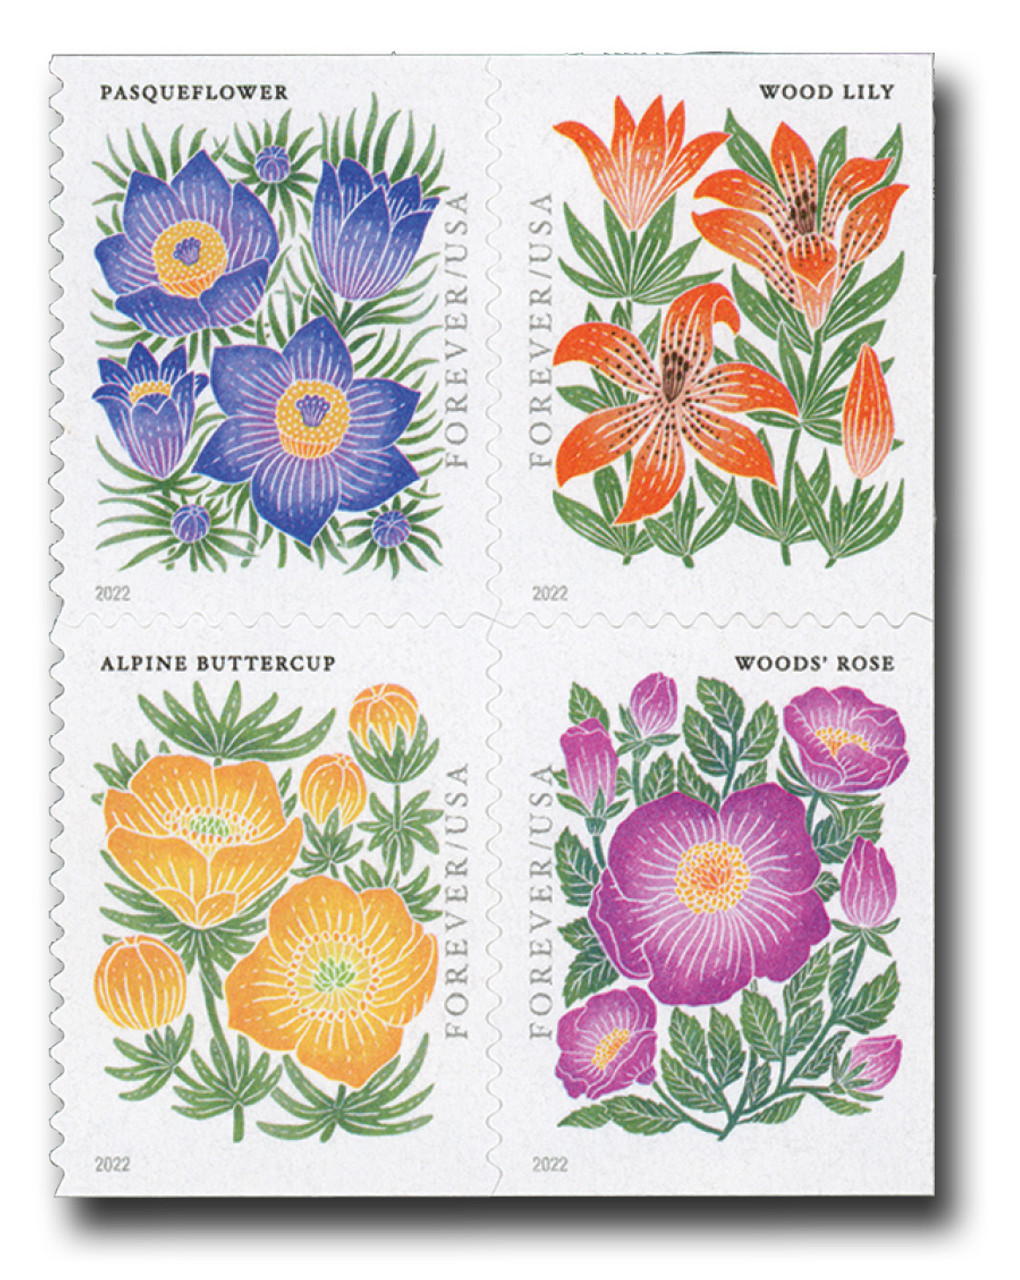  Mountain Flora Flower US First Class Forever Postage